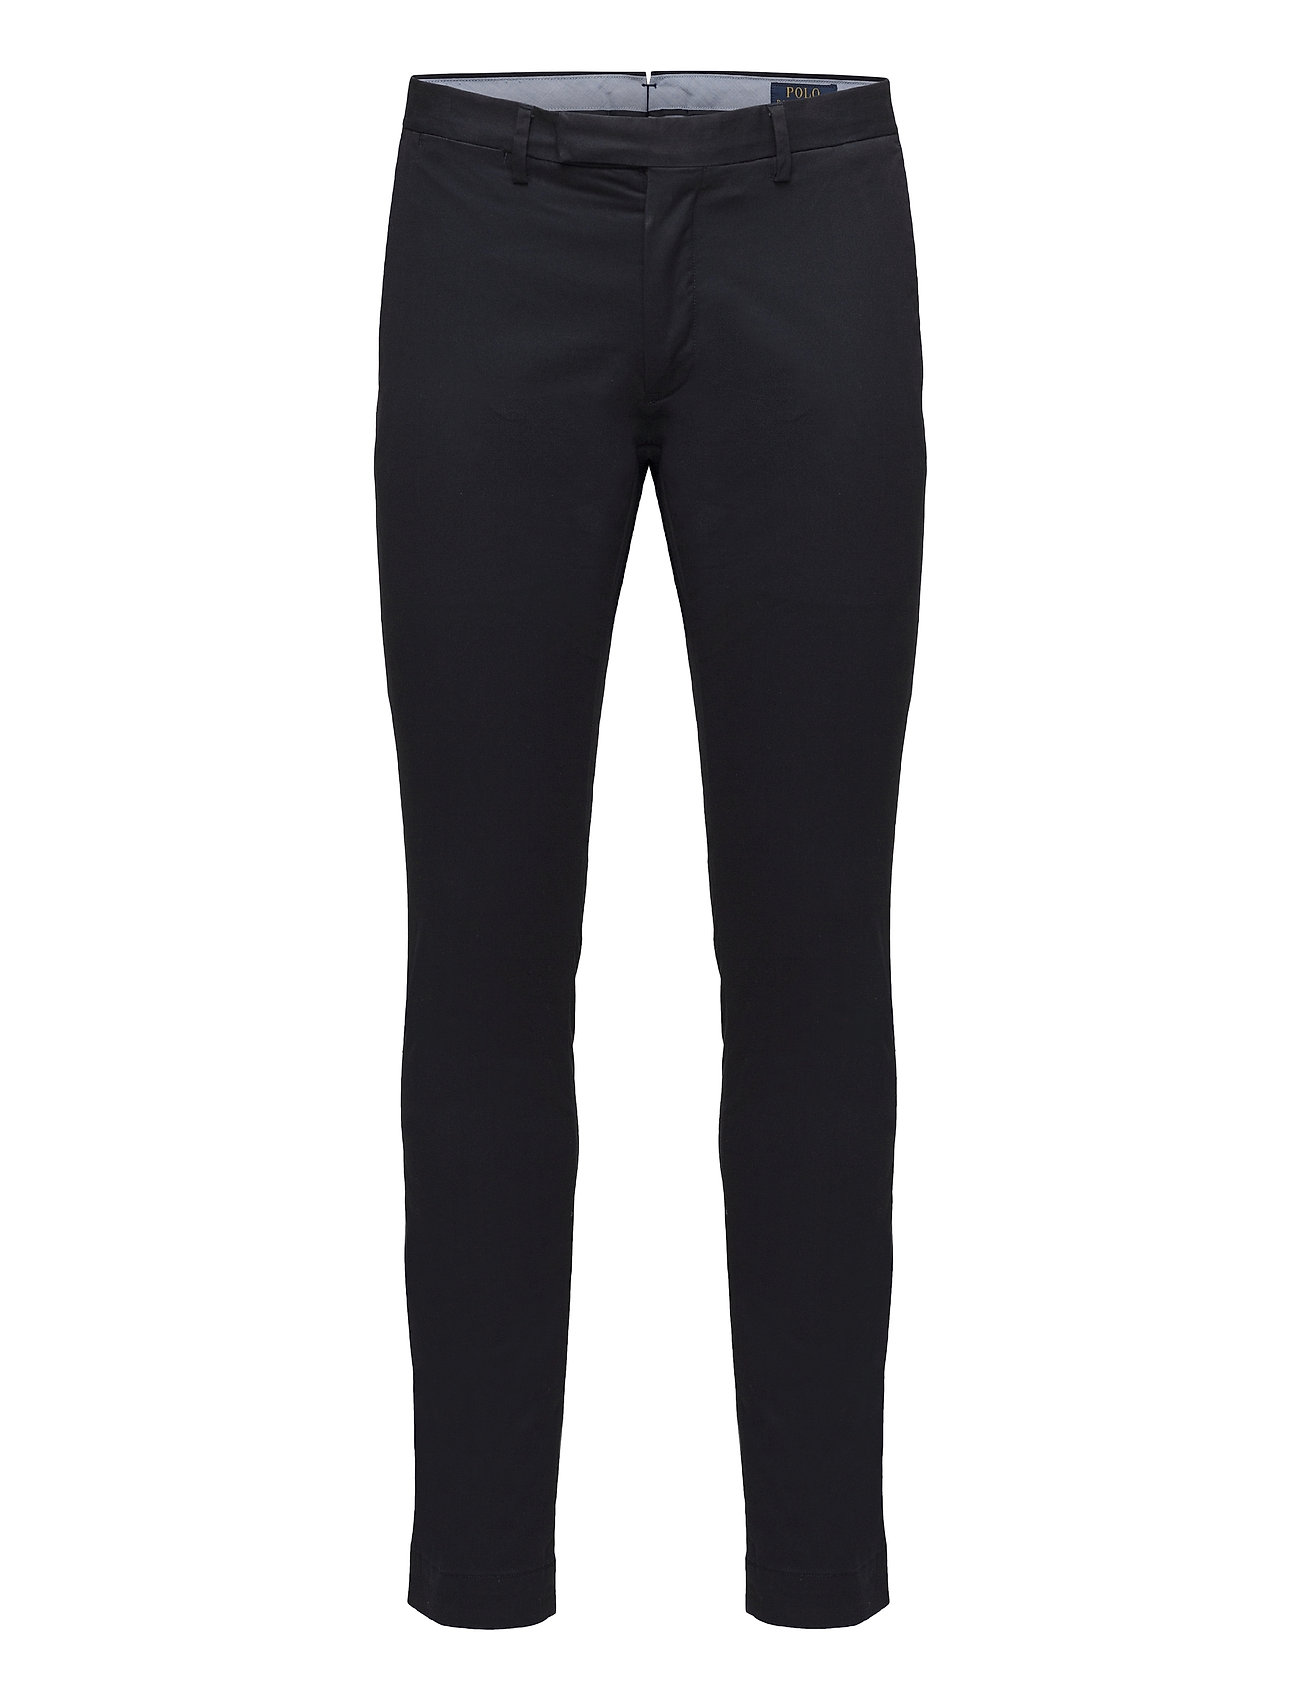 Stretch Slim Fit Chino Pant Designers Trousers Chinos Navy Polo Ralph Lauren